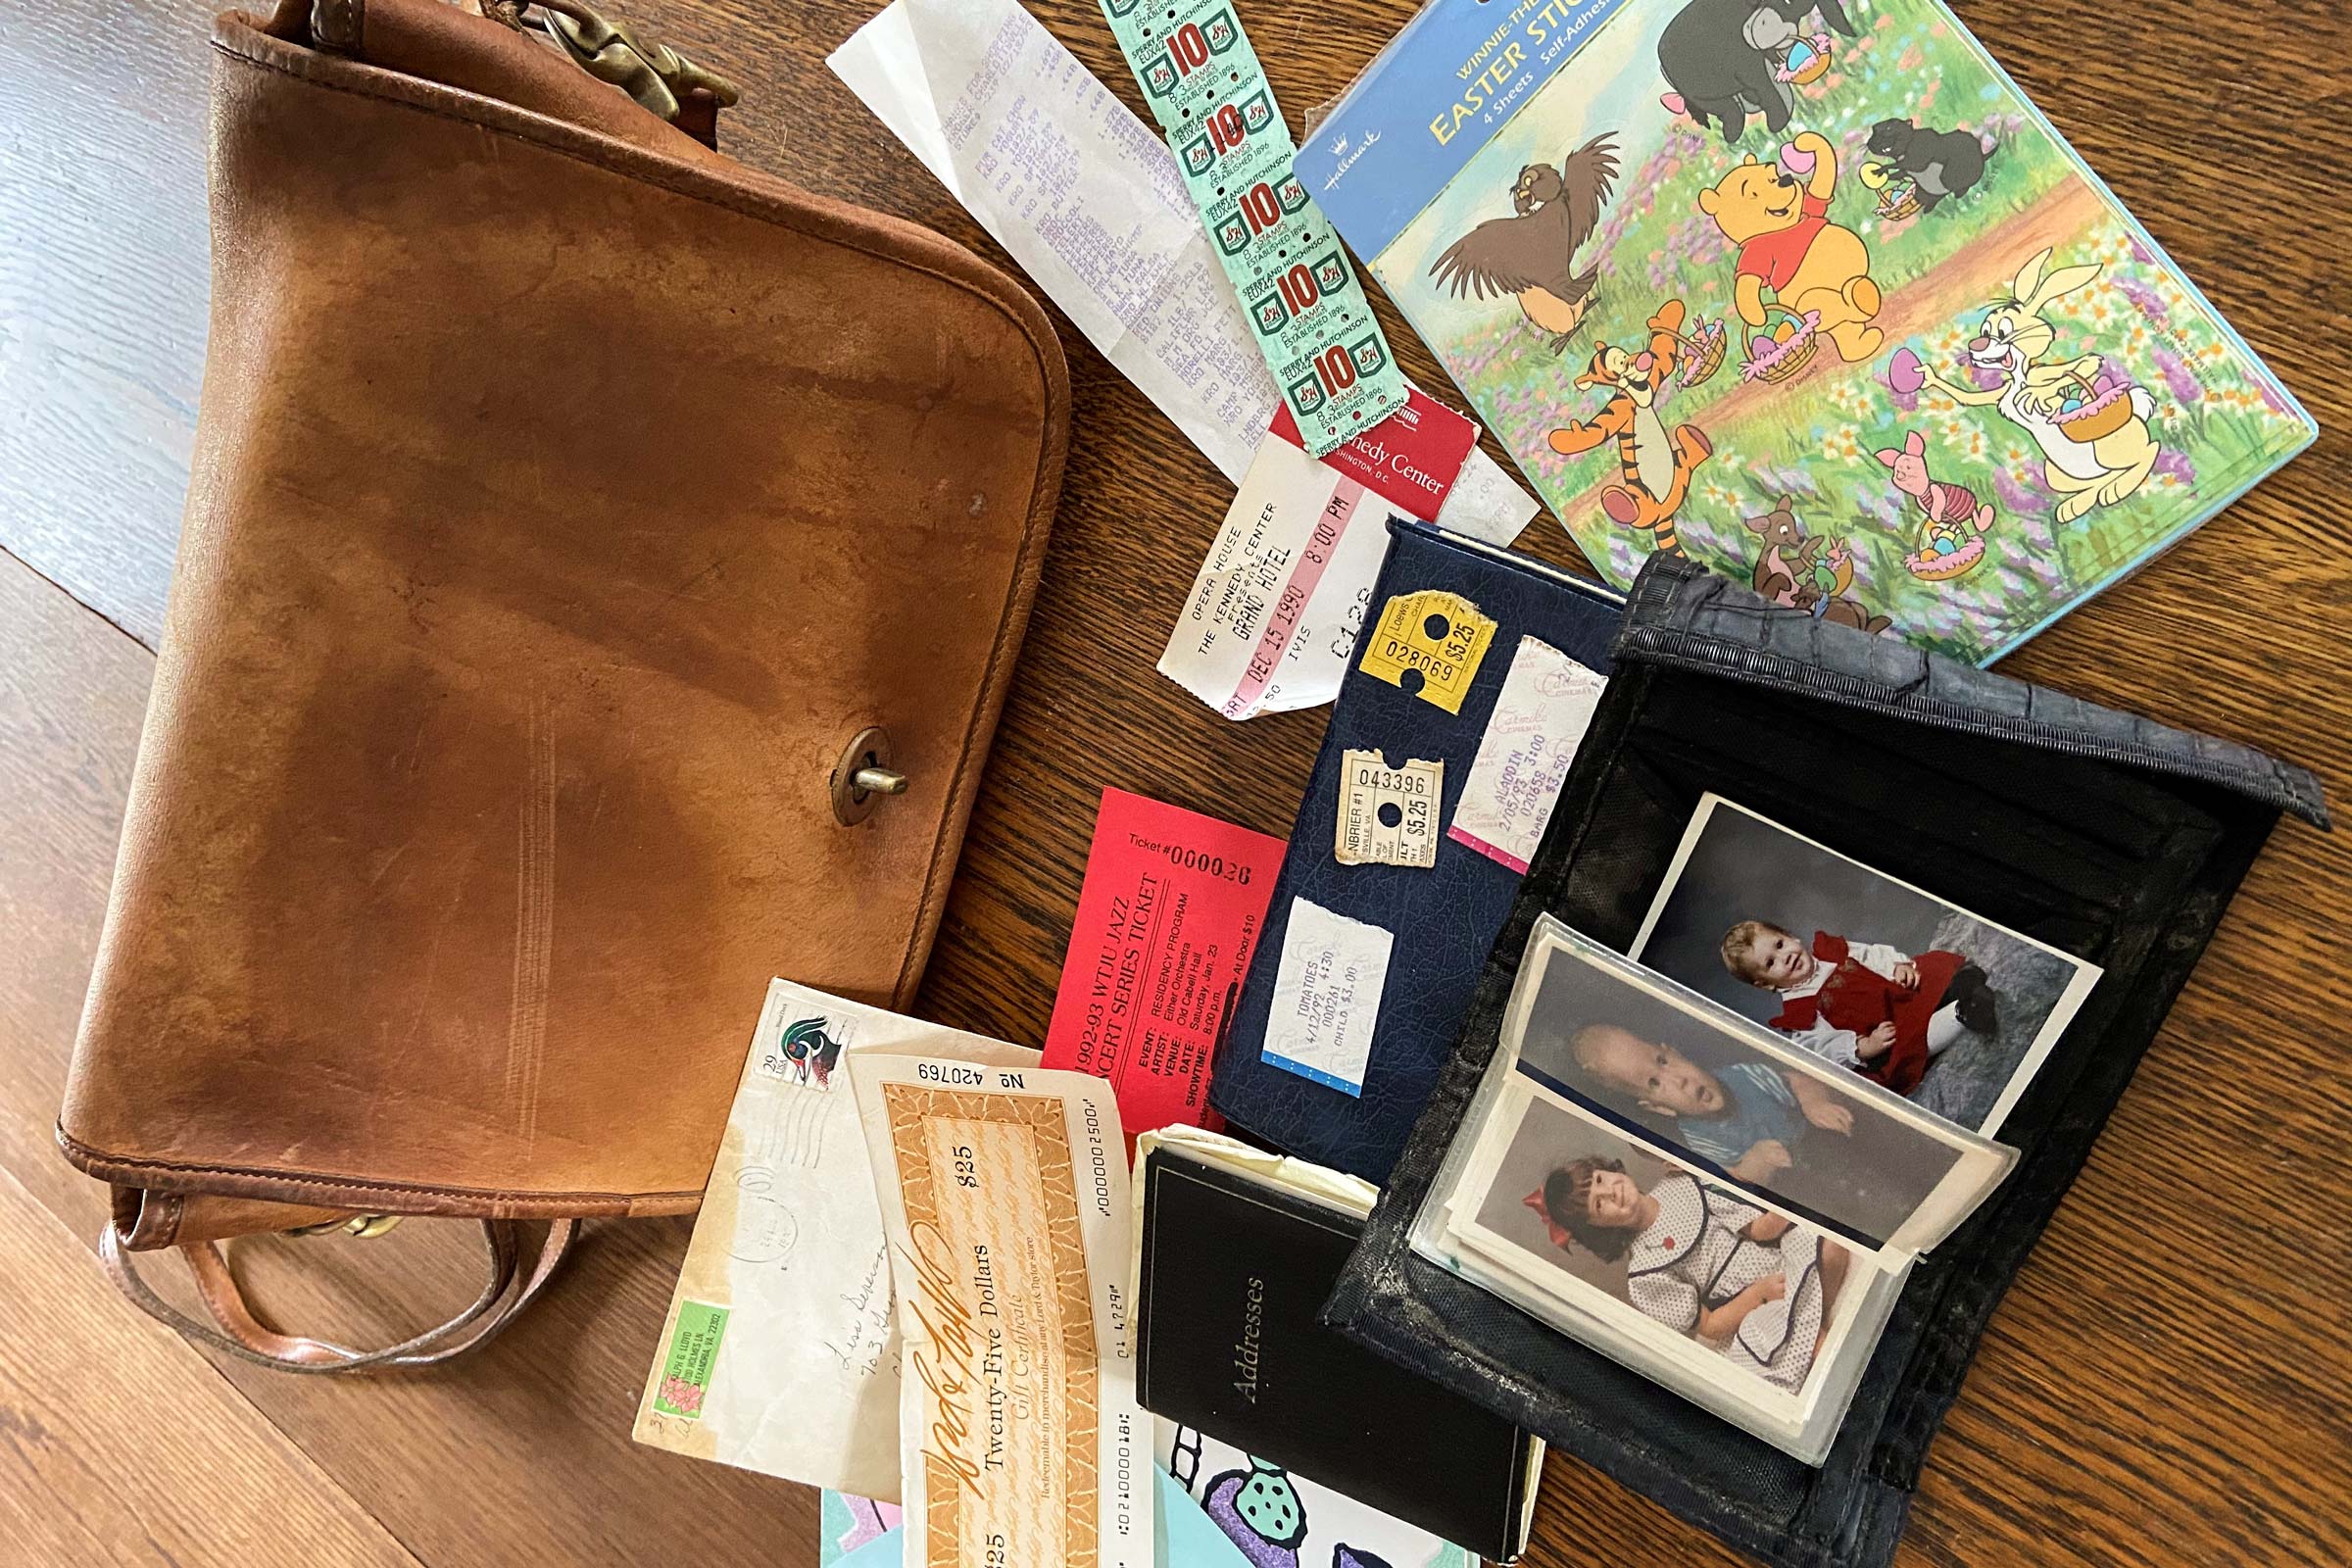 The Coach bag recovered after 27 years in the library duct work contained personal mementos, a checkbook, an address book, tickets to a play and a concert, S&H trading stamps, and a February 1993 Kroger receipt.